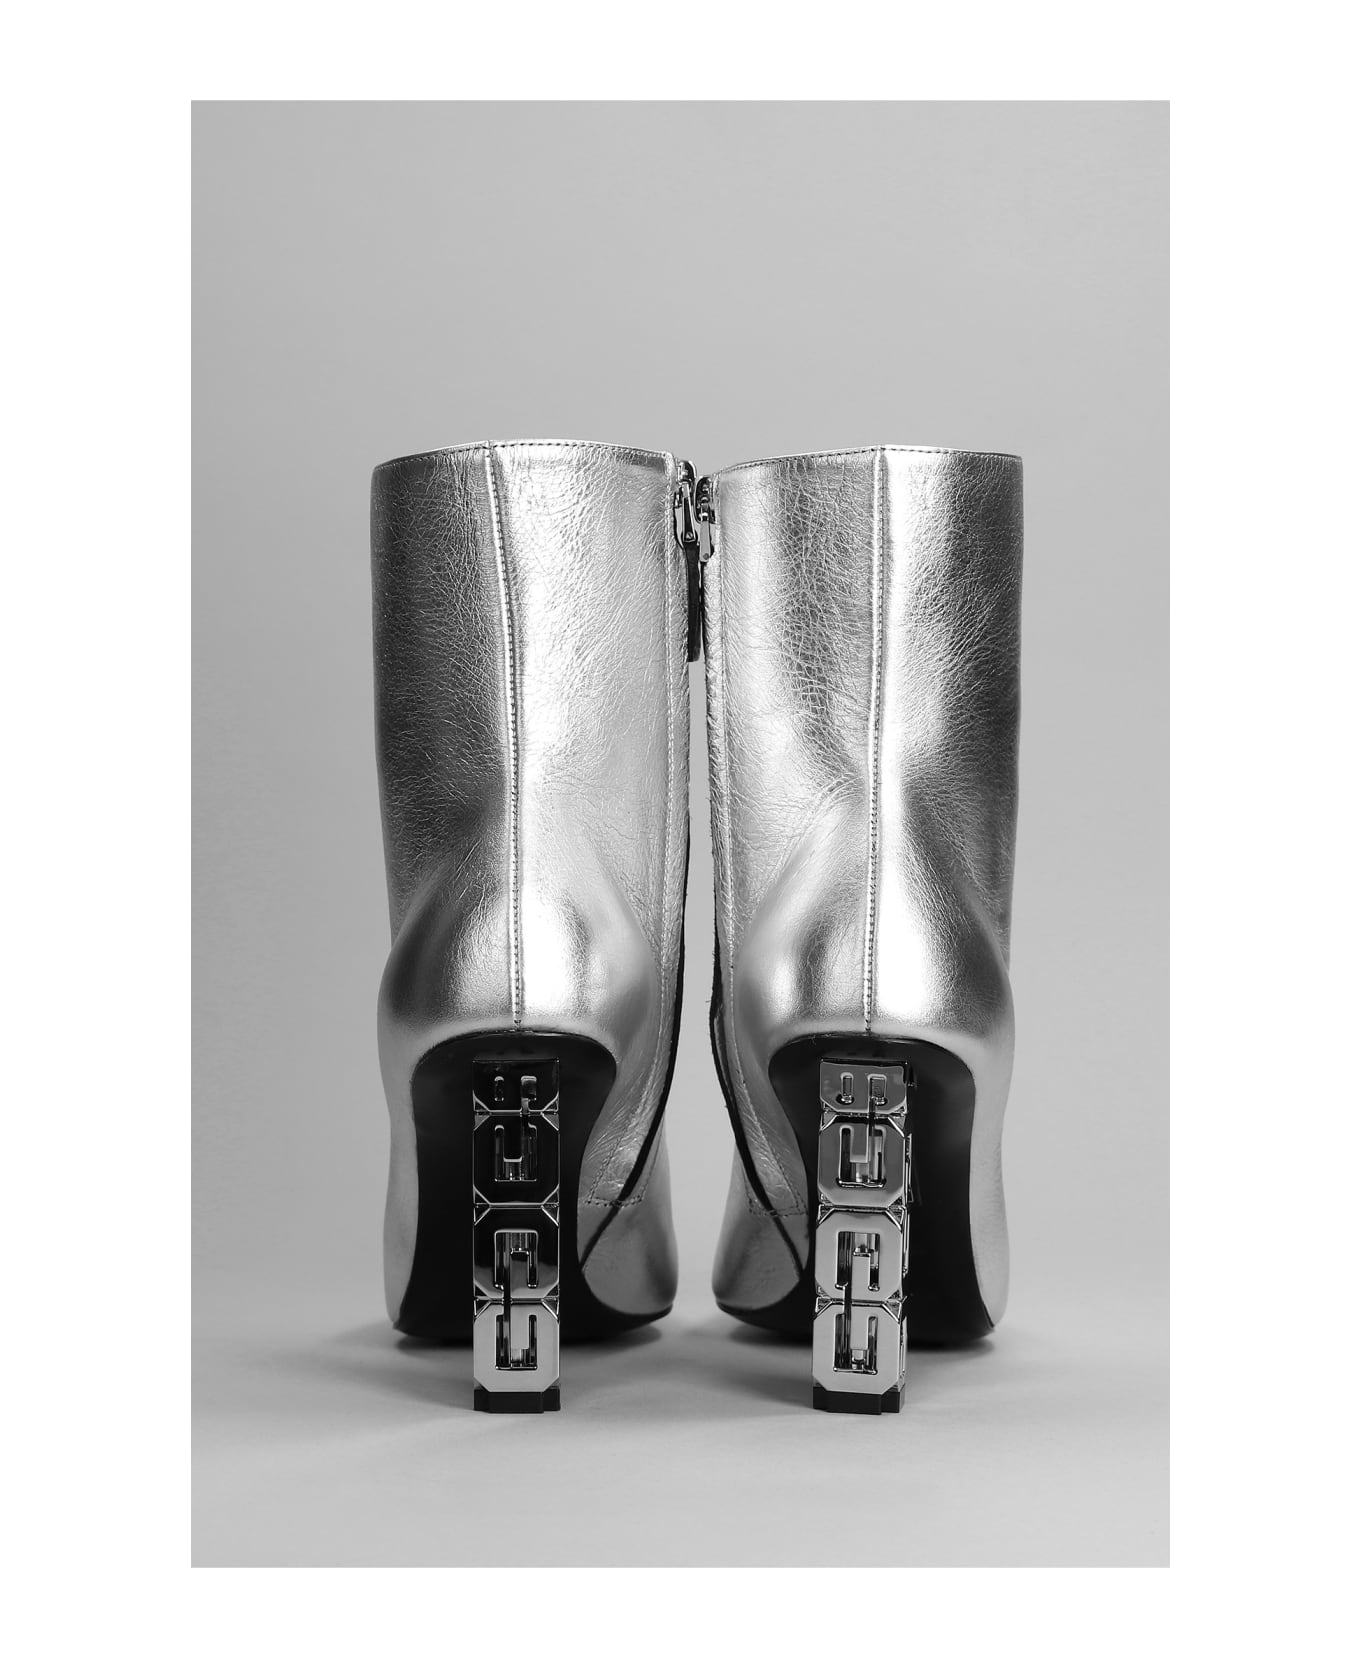 Givenchy High Heels Ankle Boots In Silver Leather - silver